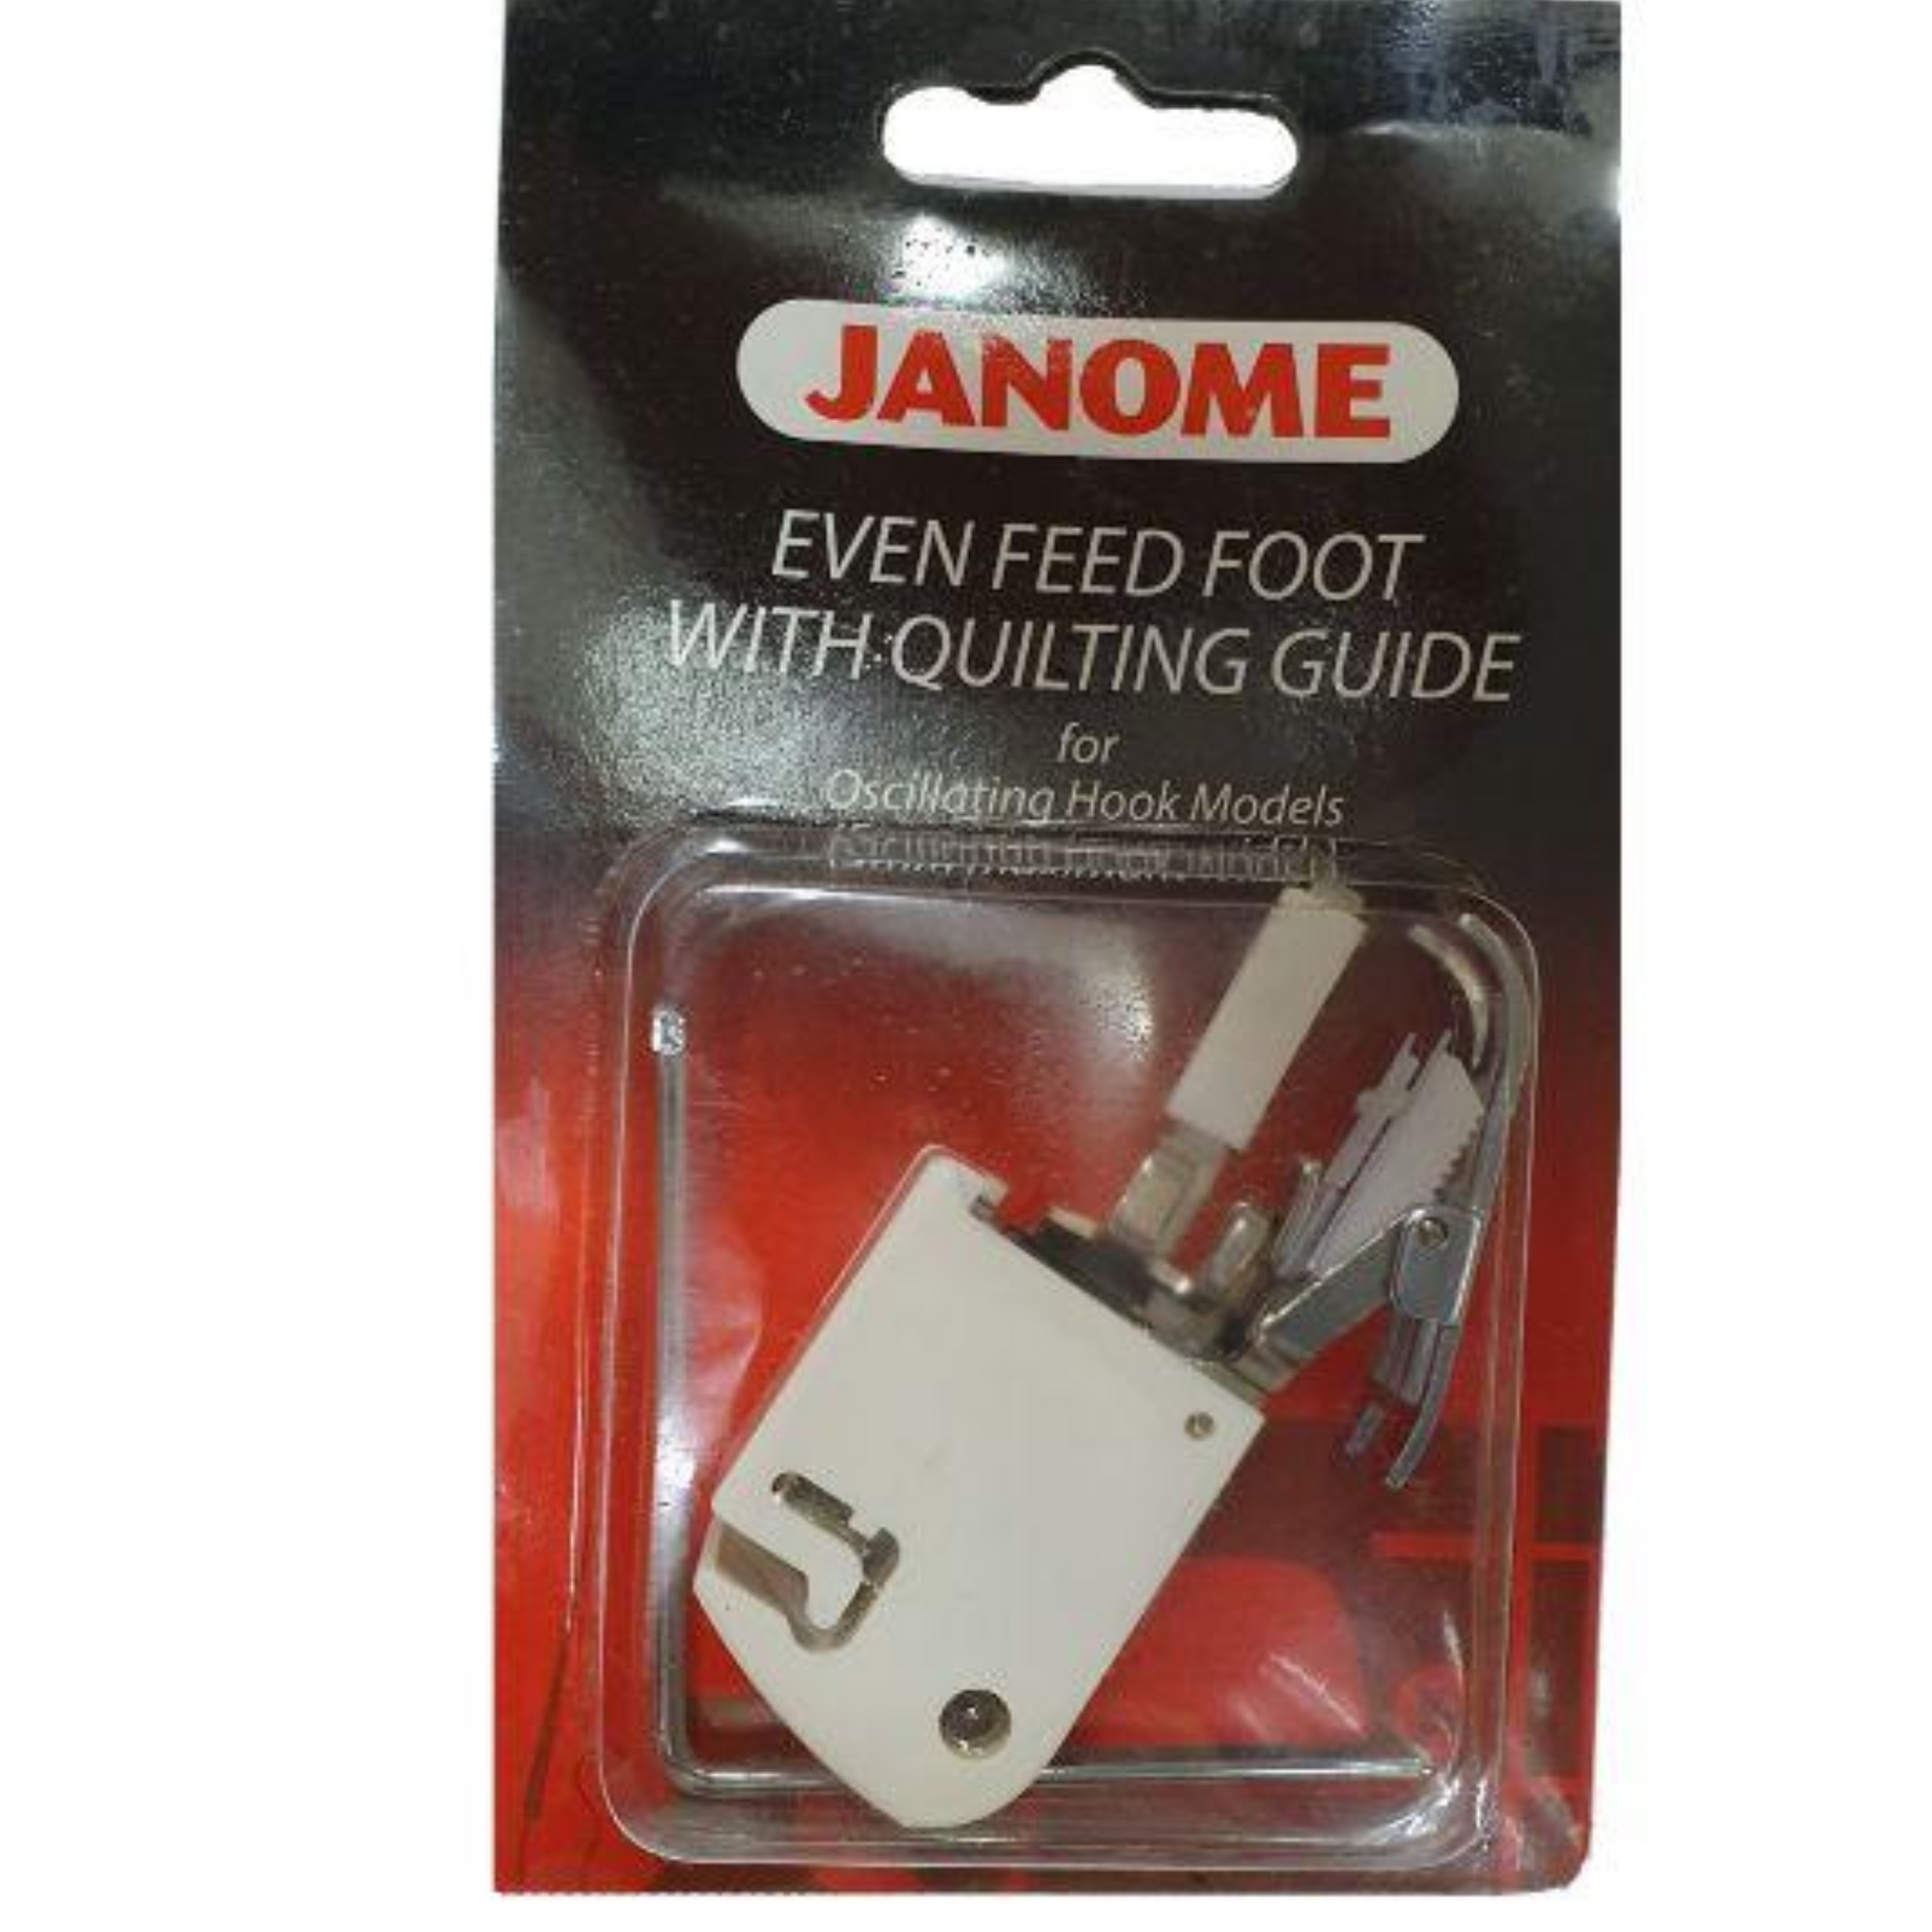 Janome - even feed foot with quilting guide - Silver - Packet